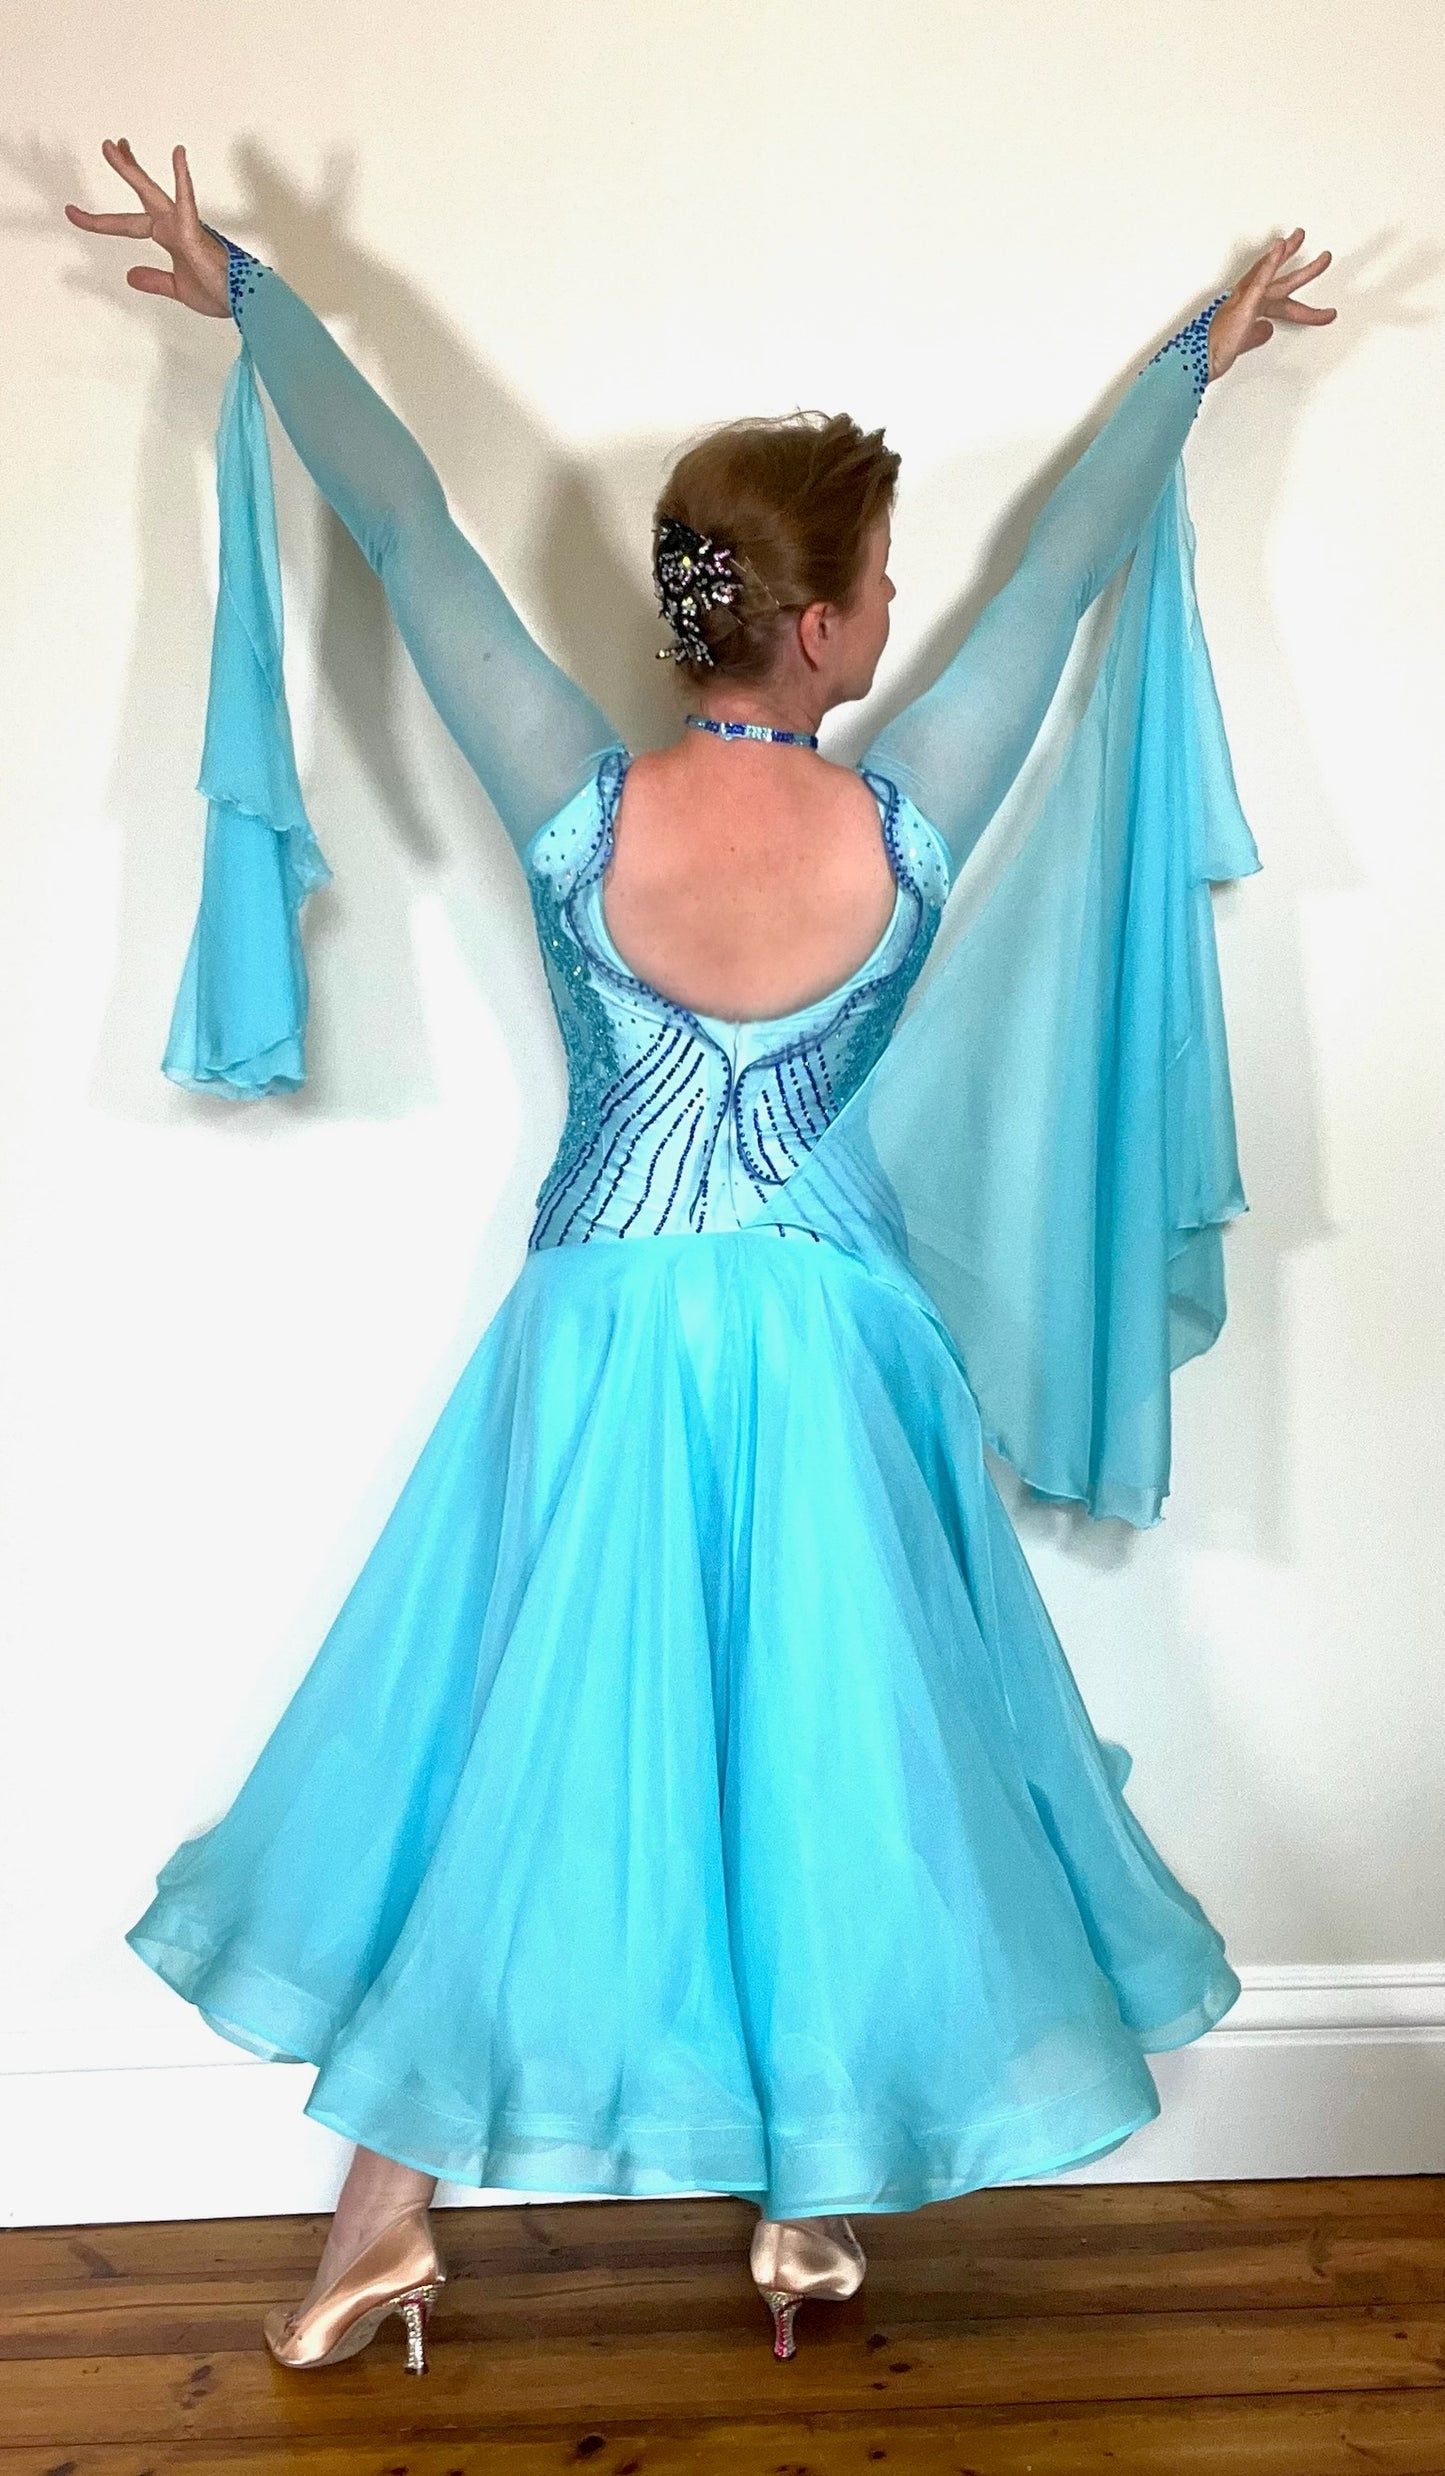 334 Paradise Blue Ballroom Dress. Decorated with Sapphire & Light Sapphire stones with matching appliqués to the side areas. Detailing to the chest and back.